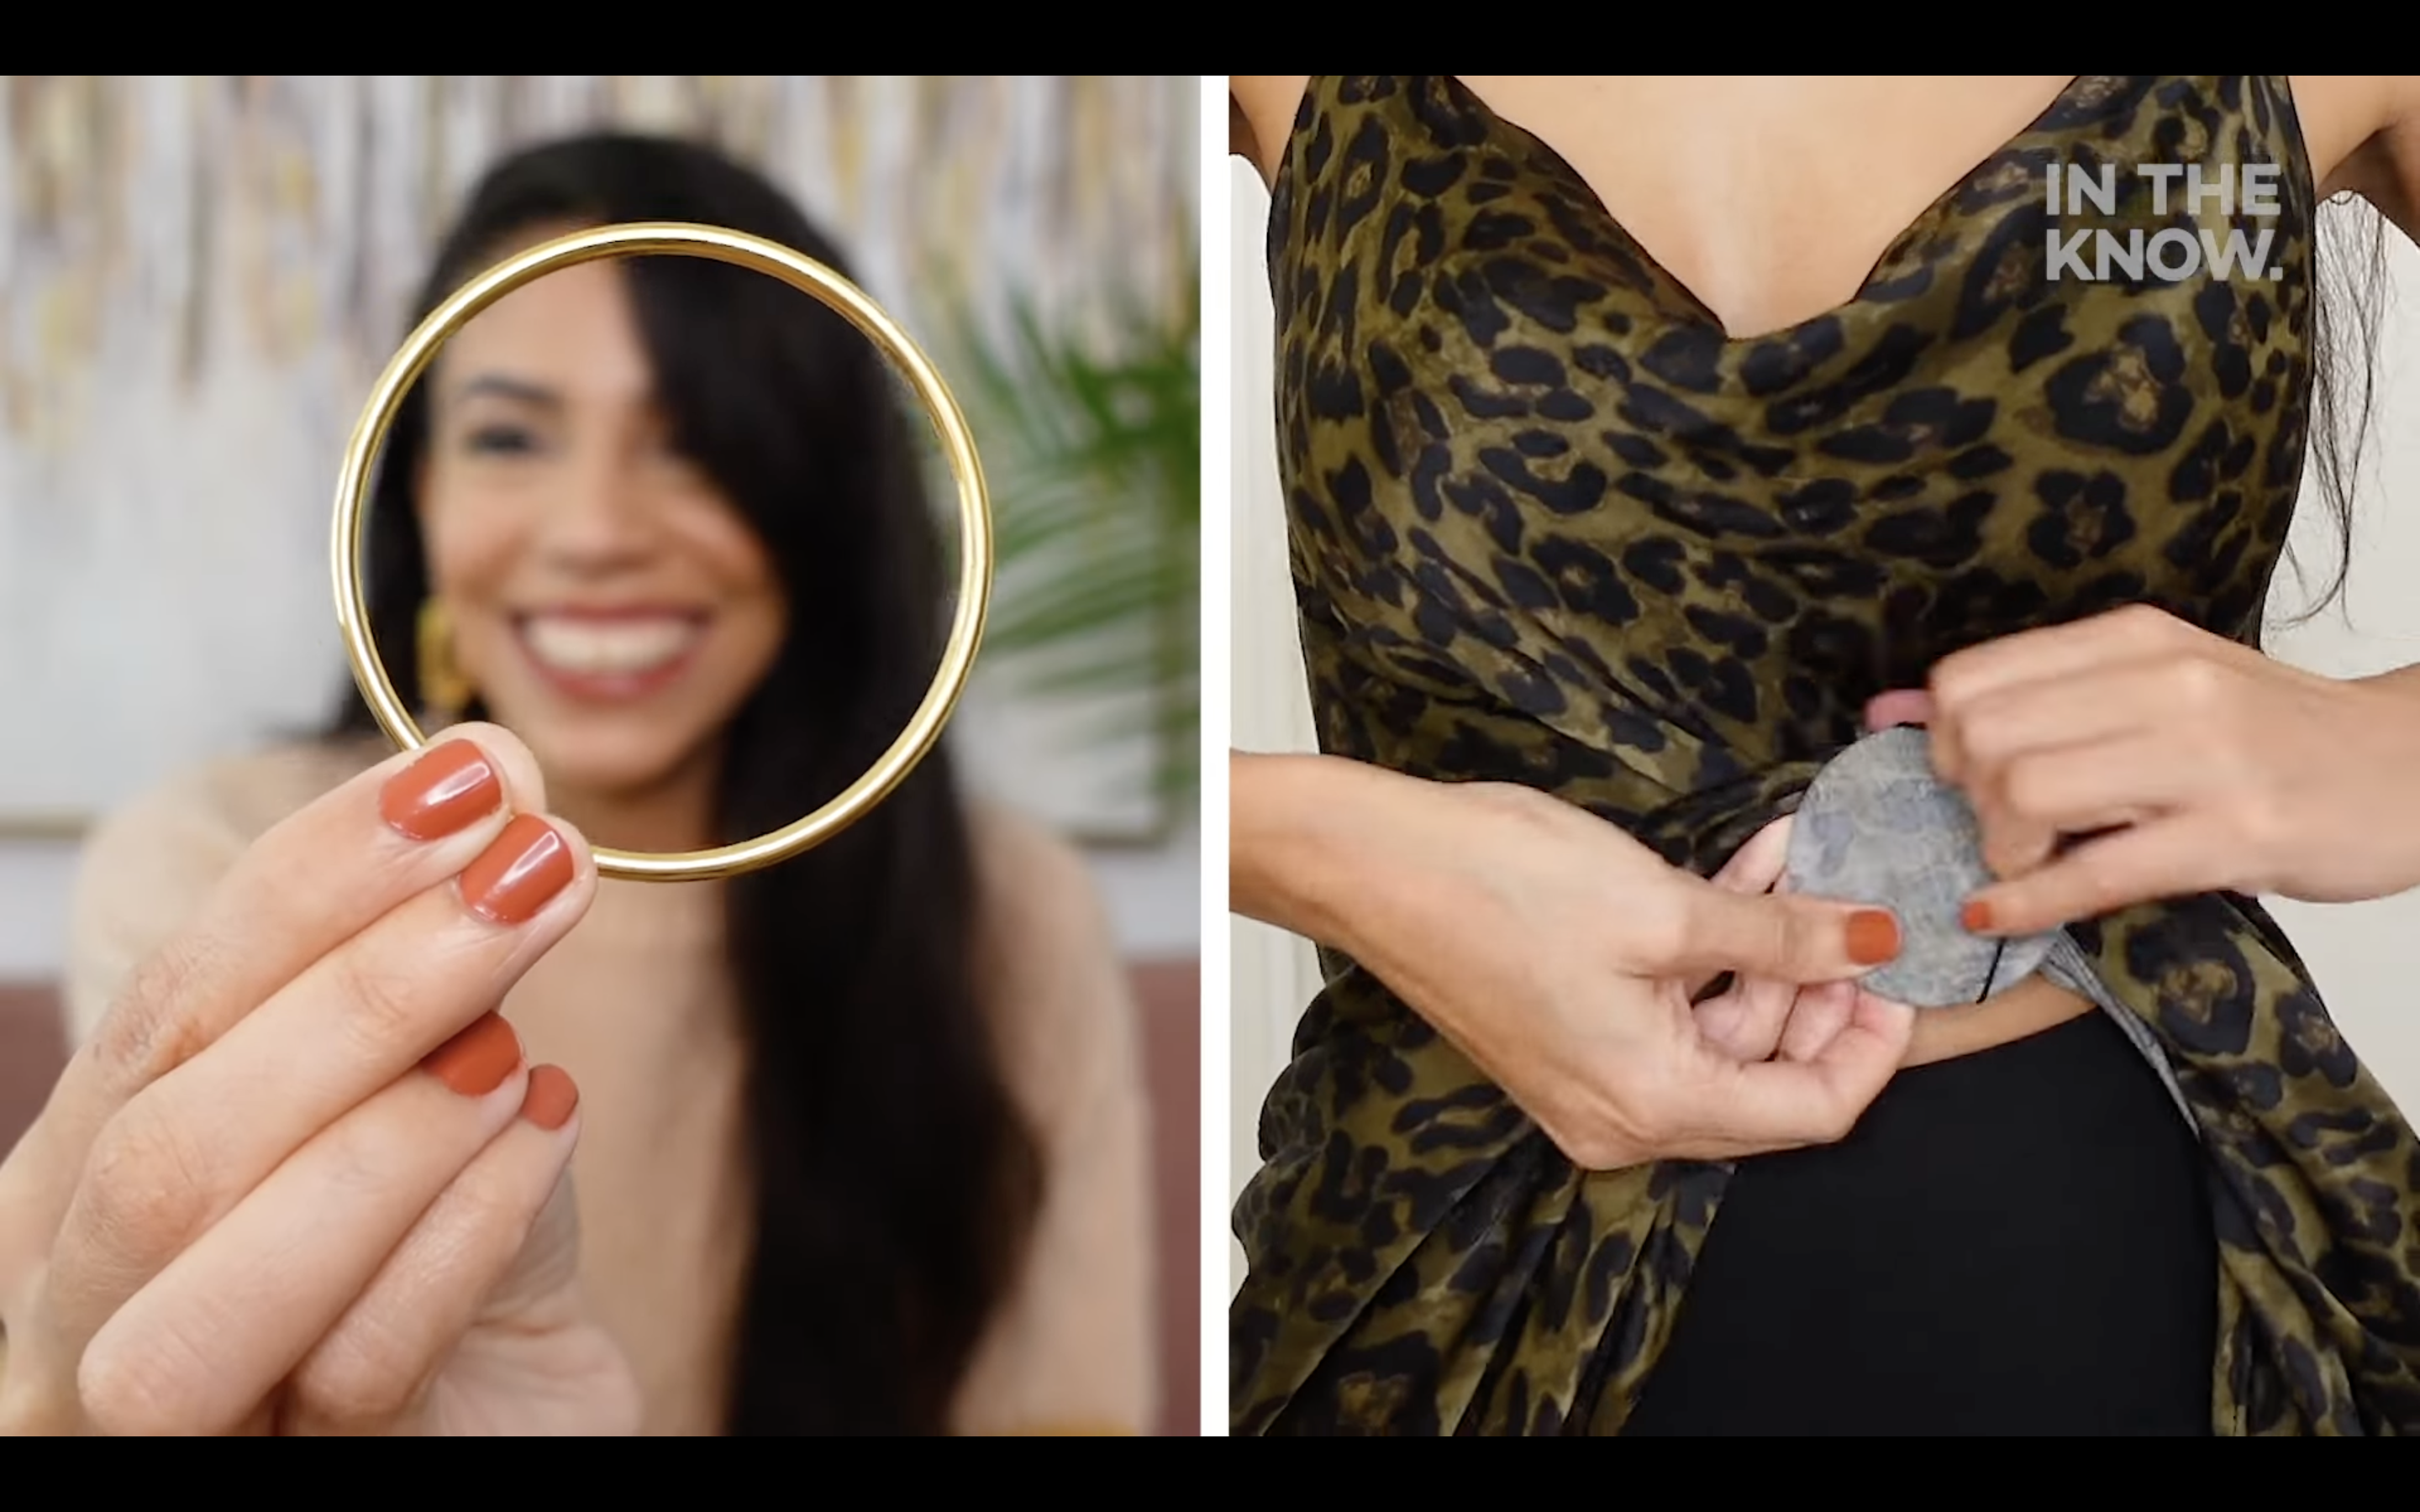 Photo of a woman with a bangle | Photo of a woman cinching her dress with a bangle | Source: Youtube.com/@InTheKnowByYahoo